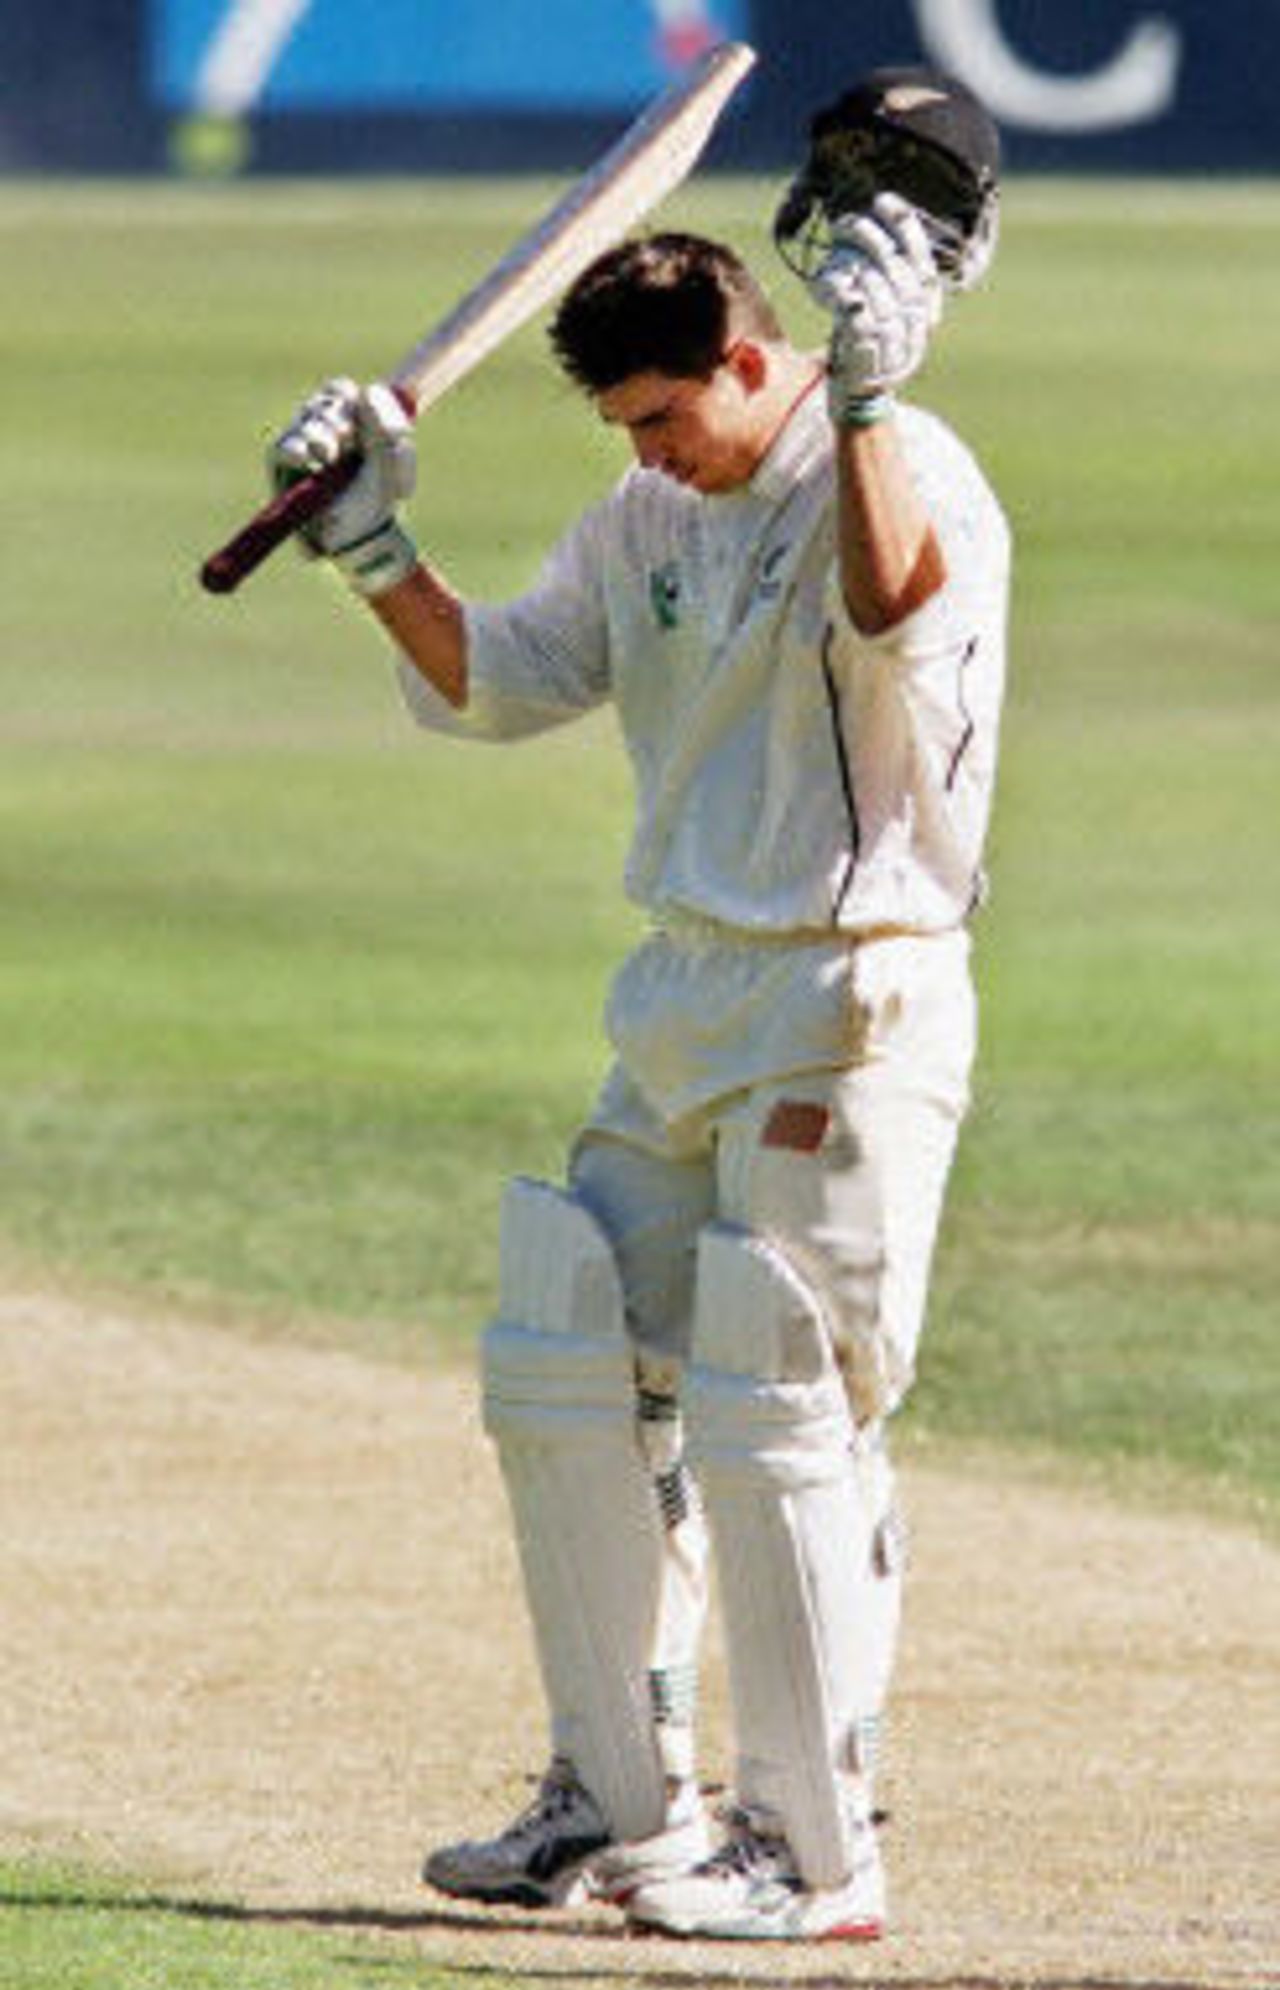 Mathew Sinclair acknowledges the applause after scoring 204 not out, day 2, 2nd Test at Christchurch, 15-19 March 2001.